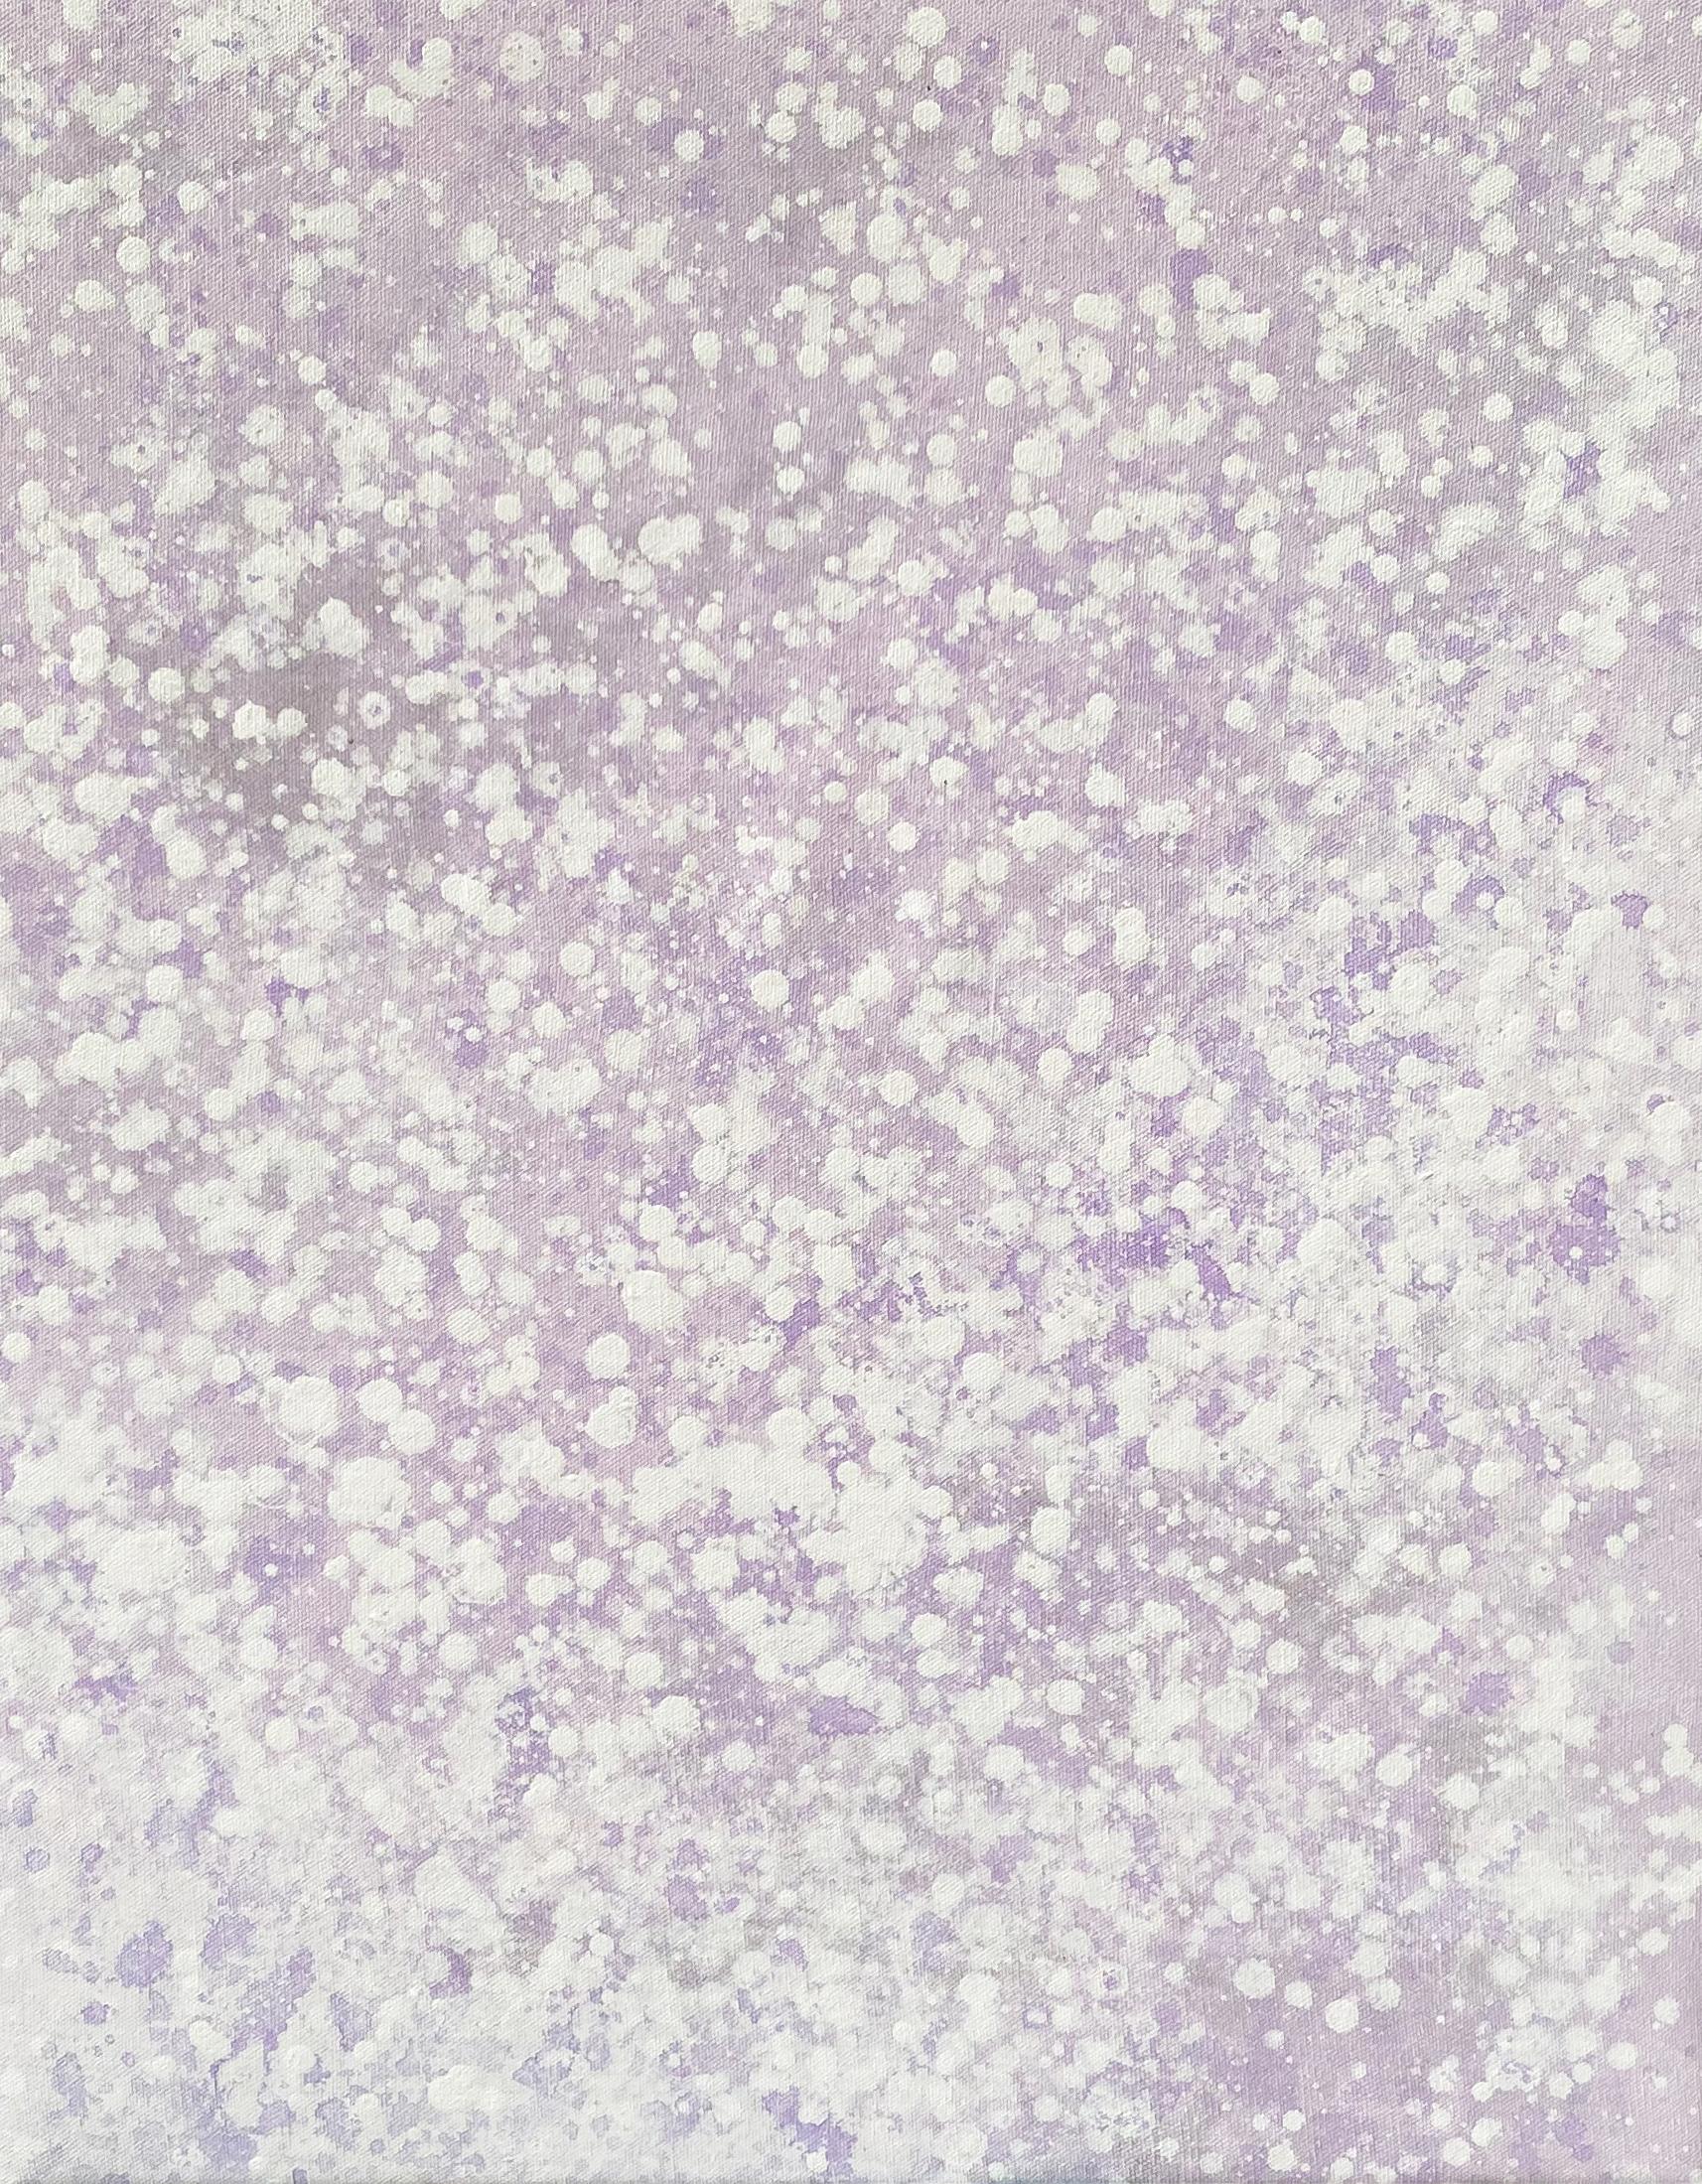 Its snowing pastel lavender abstract minimal expressionist modern painting dots